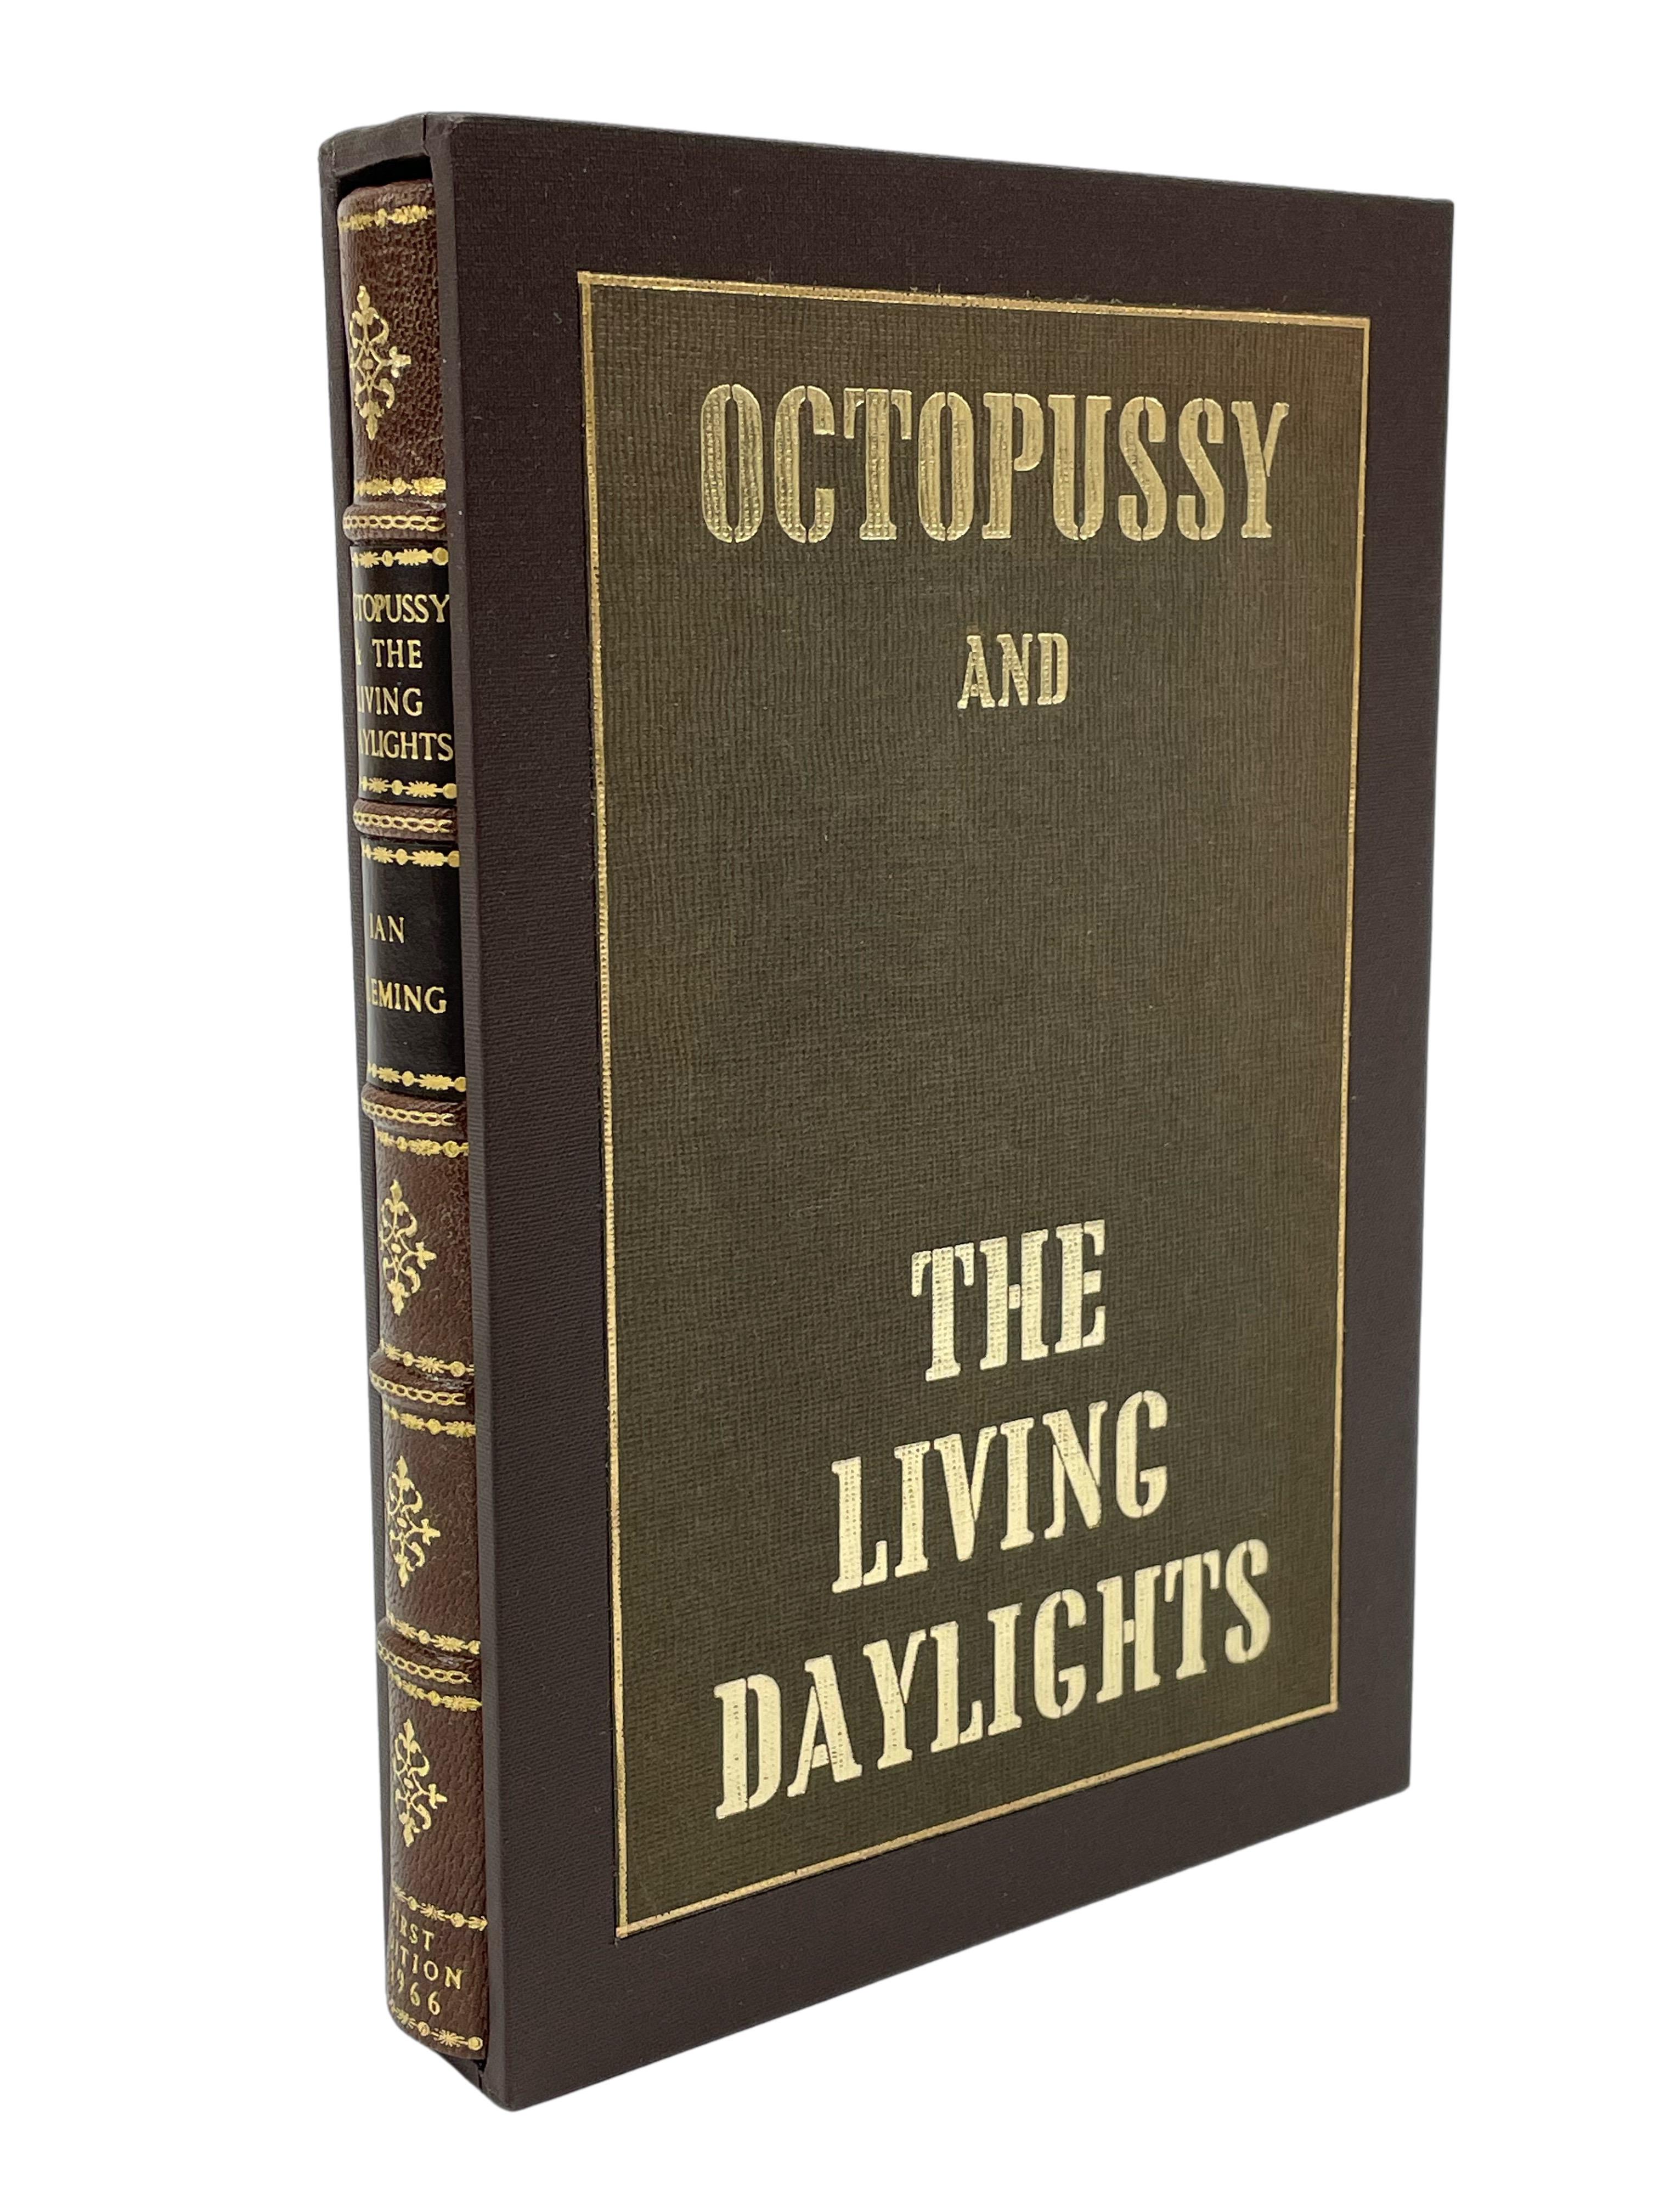 Octopussy and The Living Daylights by Ian Fleming, First UK Edition, 1966 In Good Condition For Sale In Colorado Springs, CO